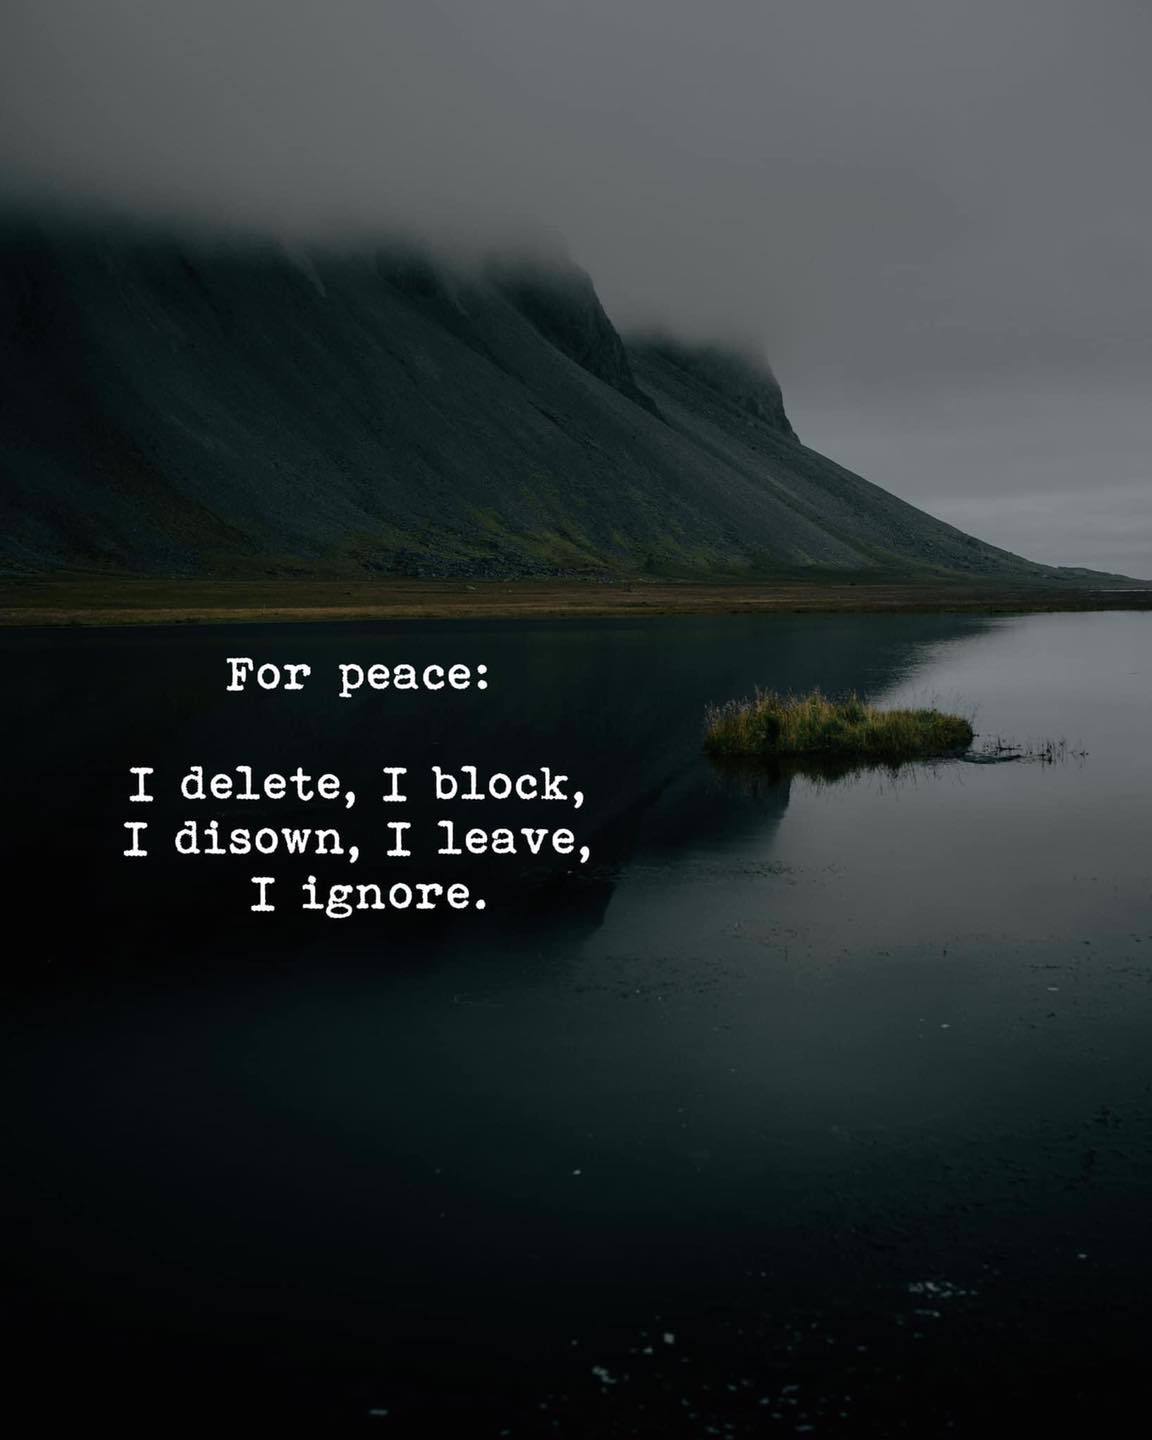 Quotes 'nd Notes - For peace: I delete, I block, I disown, I leave,...